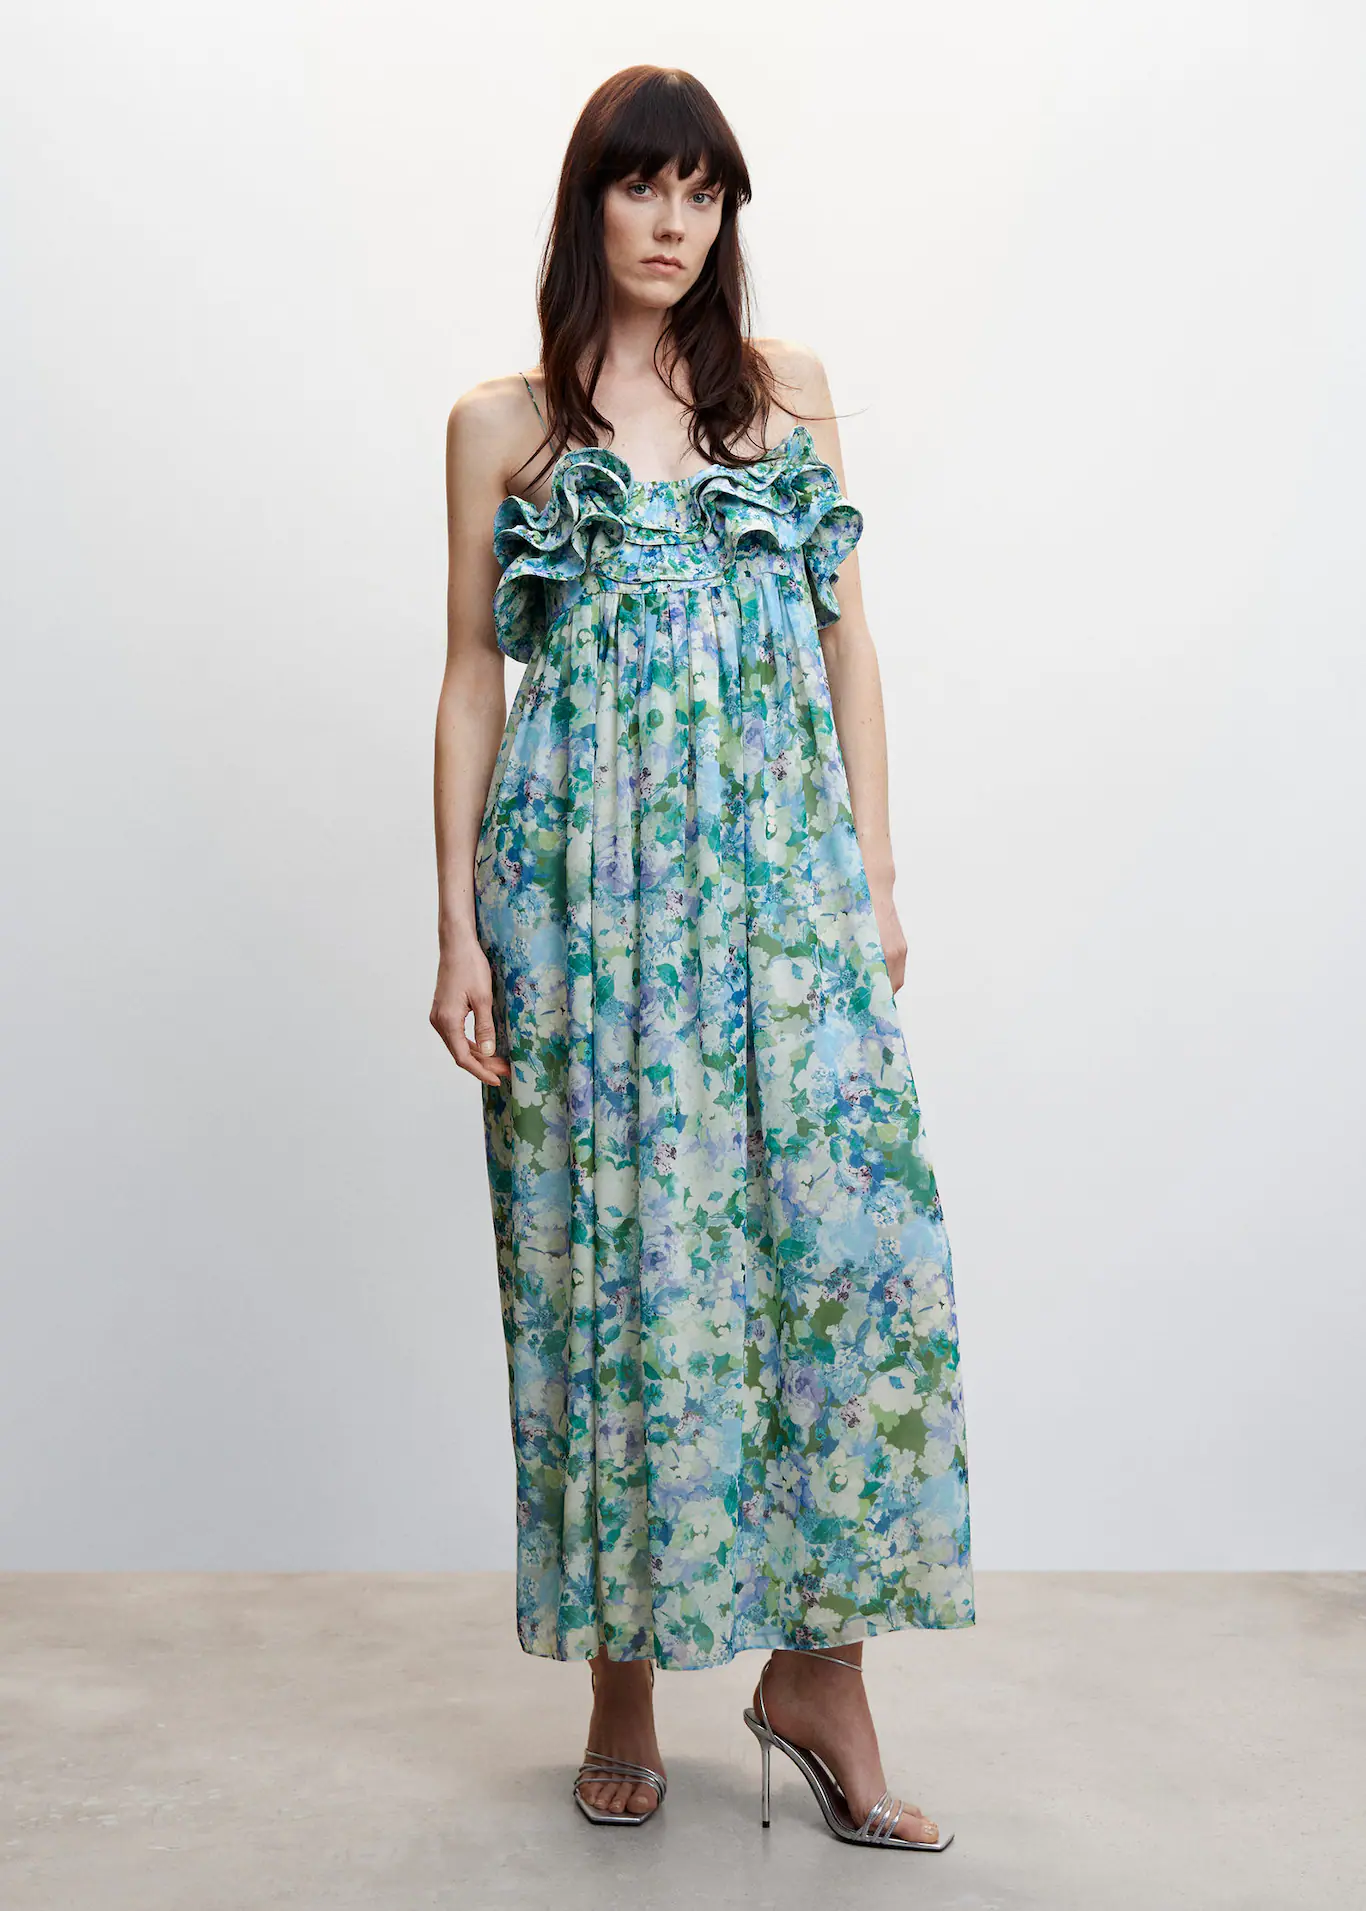 Floral ruffled dress from Mango